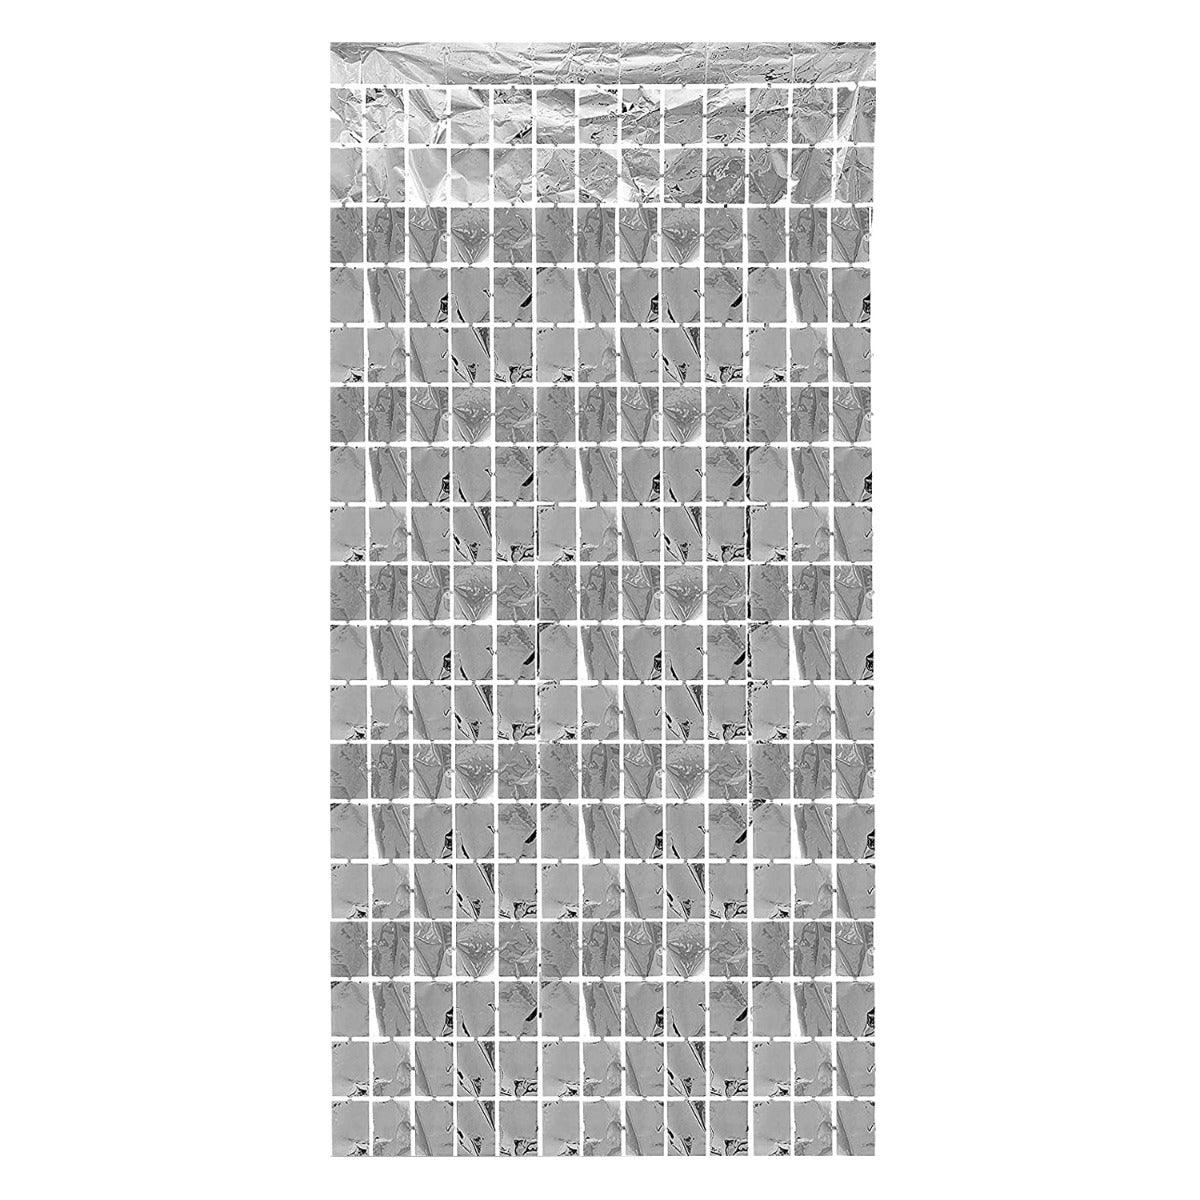 PartyCorp Square Shaped Metallic Silver Foil Curtain, 1 Pack